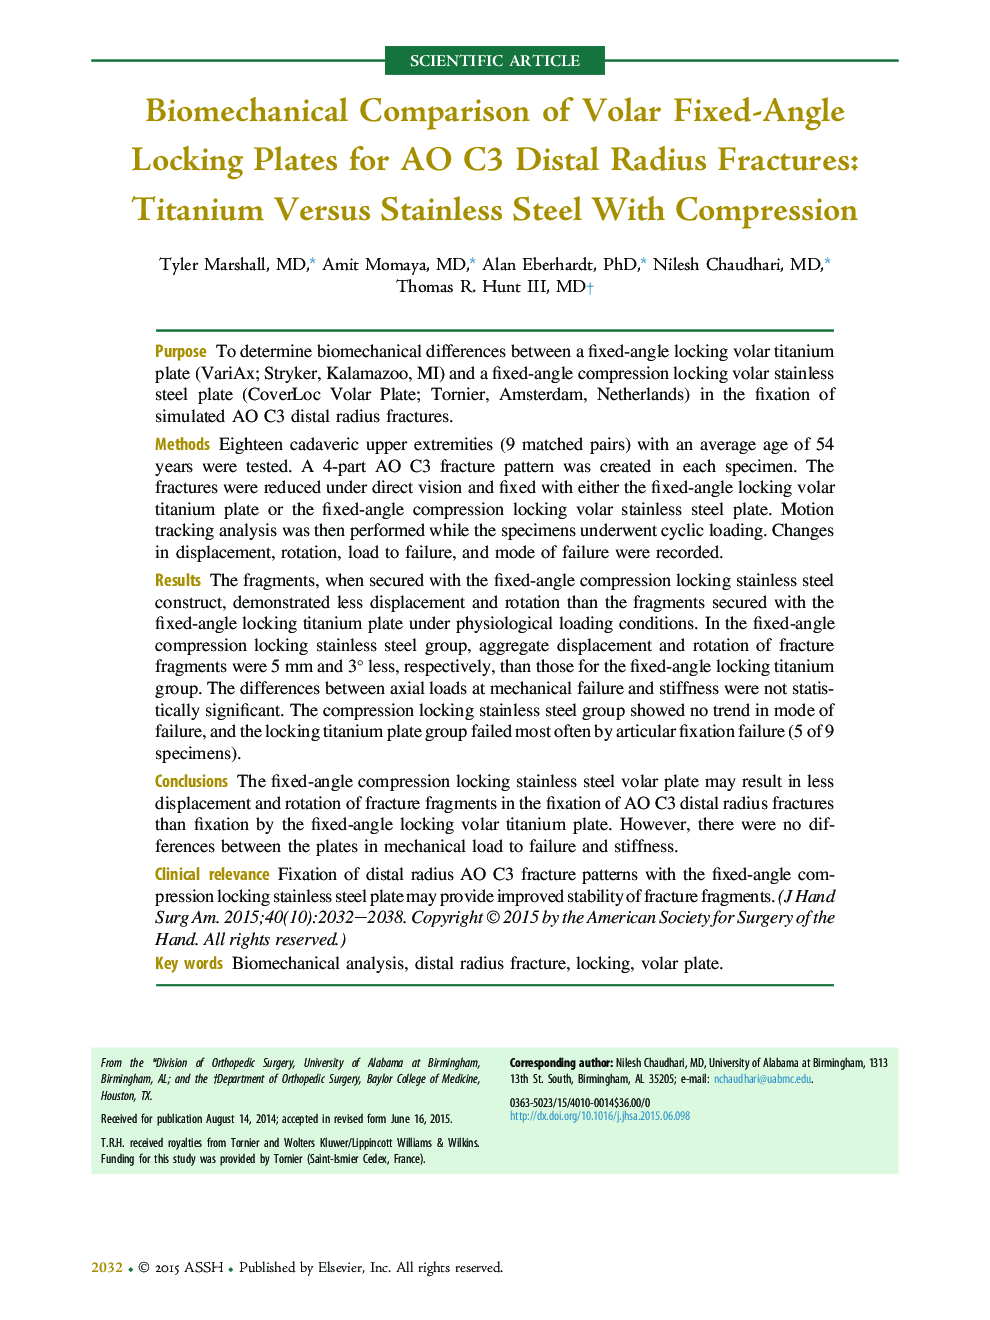 Biomechanical Comparison of Volar Fixed-Angle Locking Plates for AO C3 Distal Radius Fractures: Titanium Versus Stainless Steel With Compression 